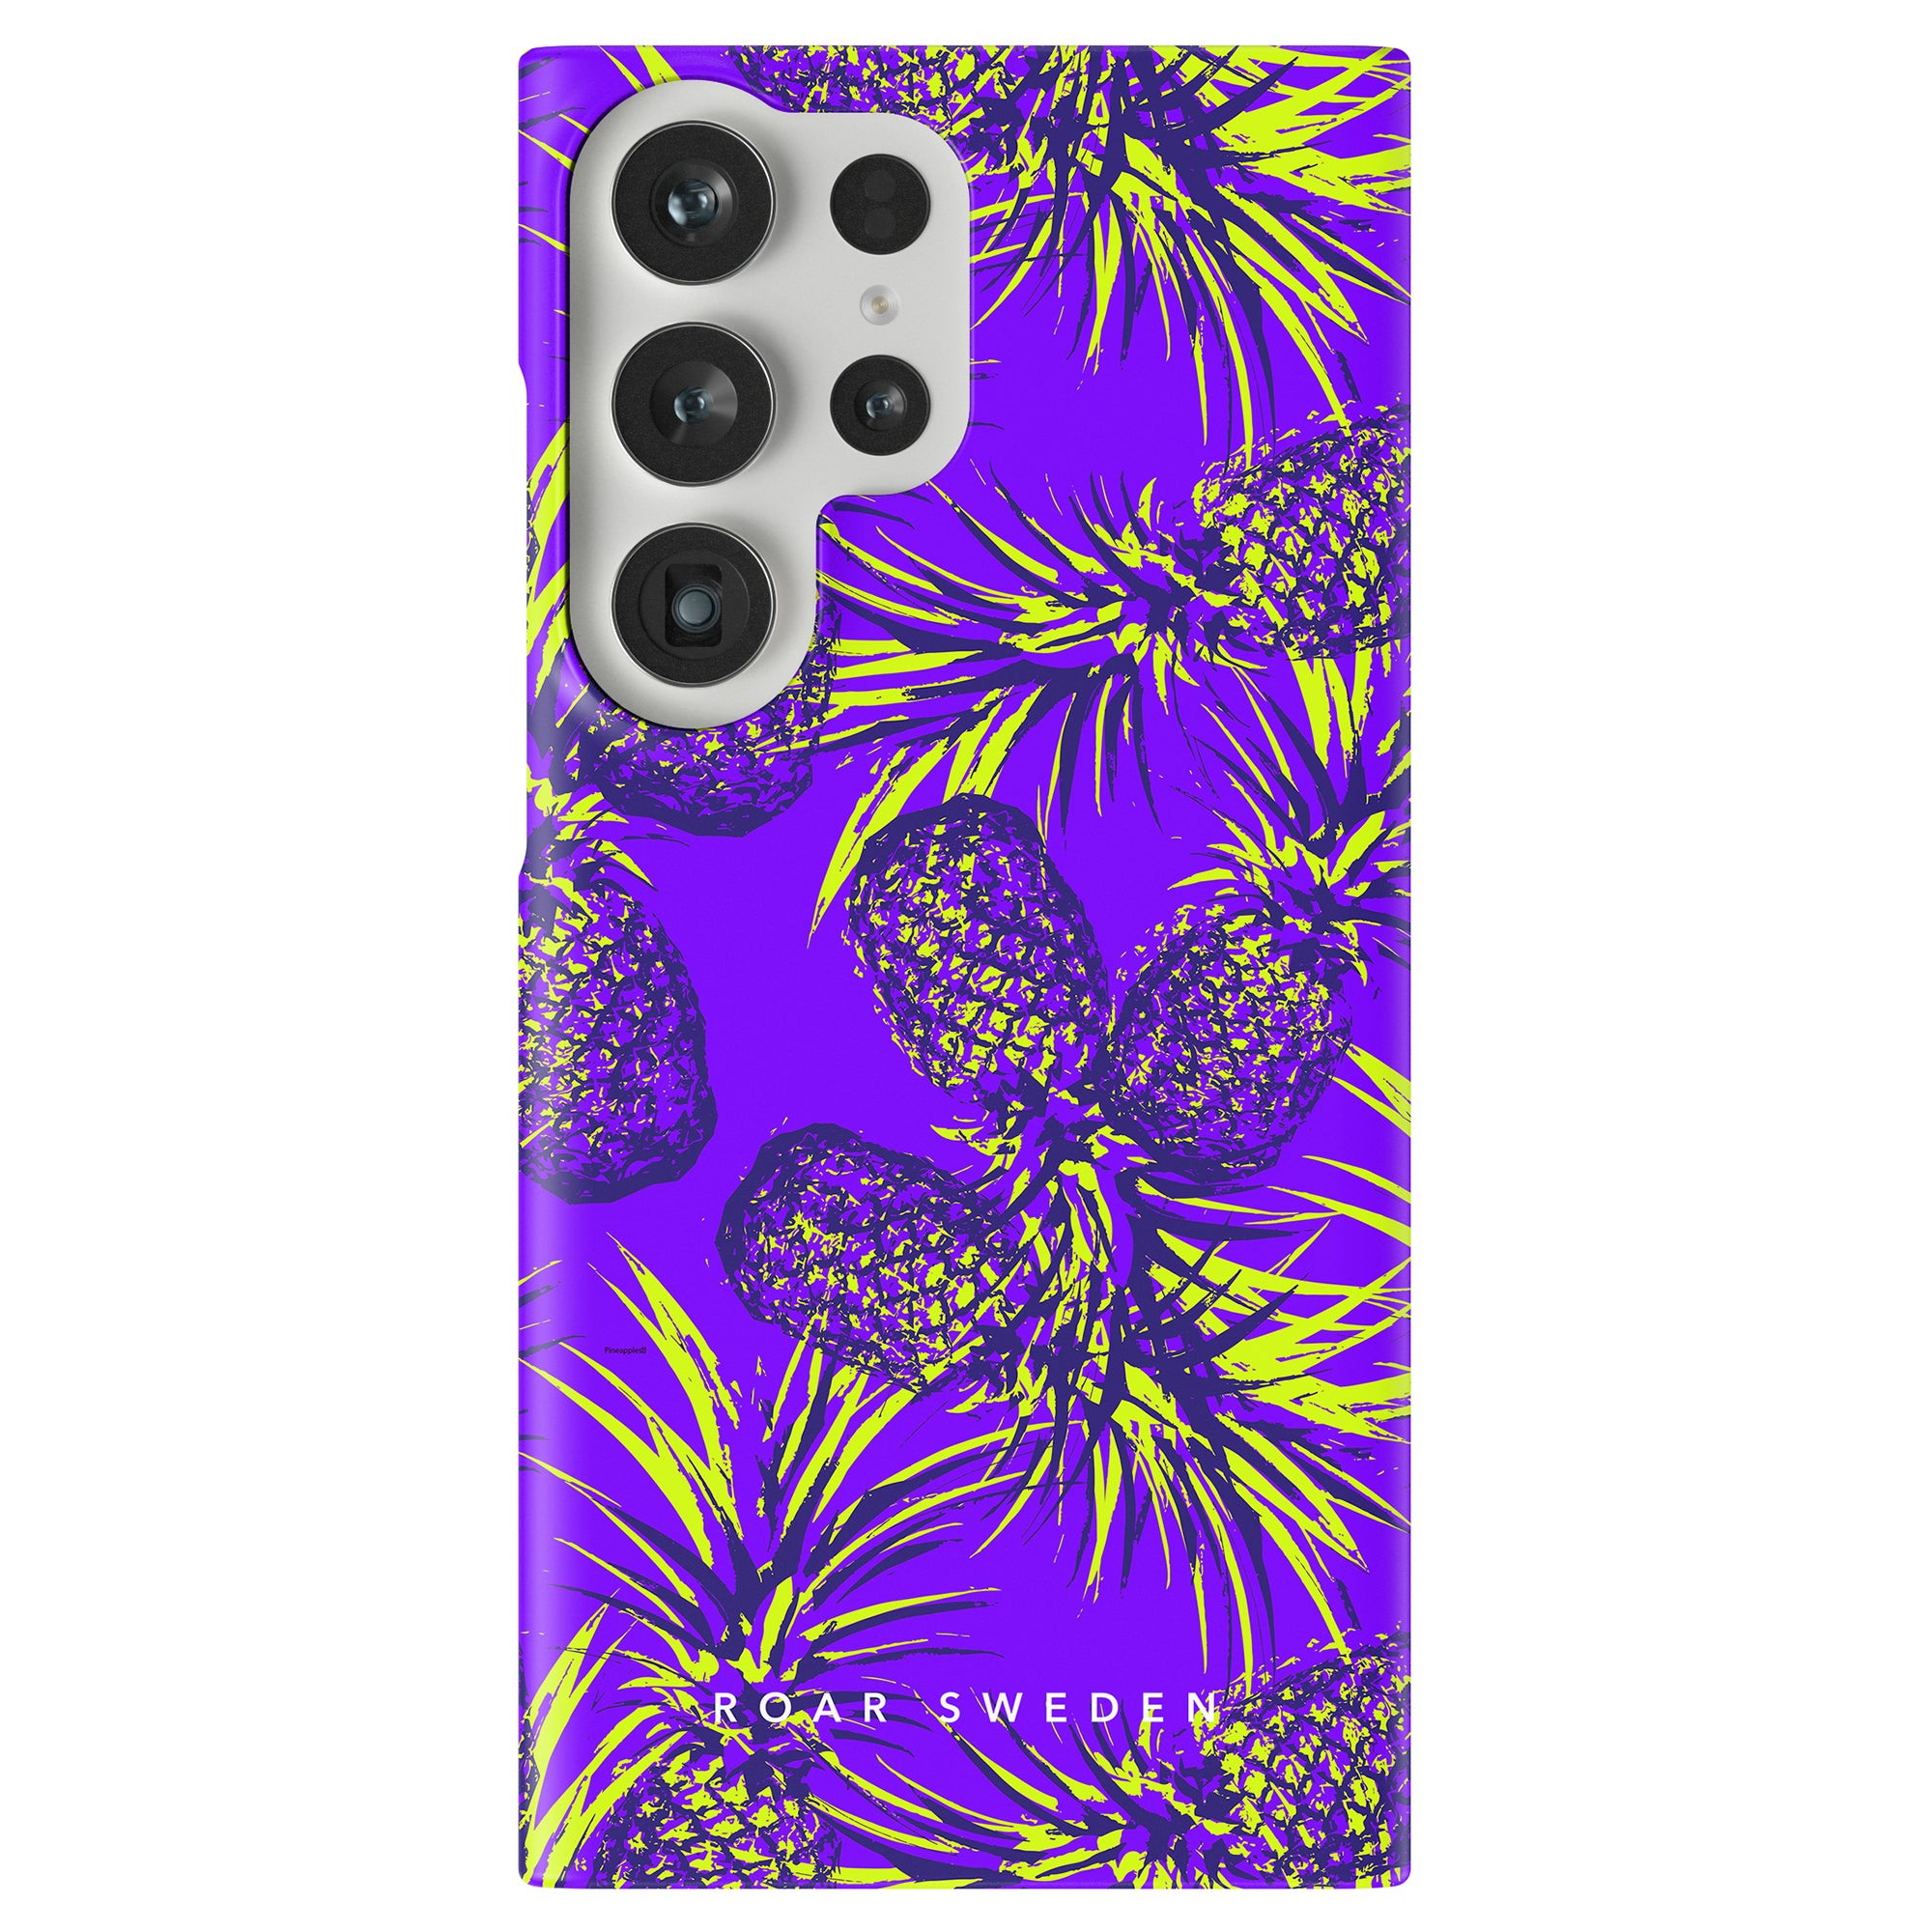 A vibrant purple Comosus smartphone case with a tropical pineapple pattern and camera cutouts, optimized for SEO.